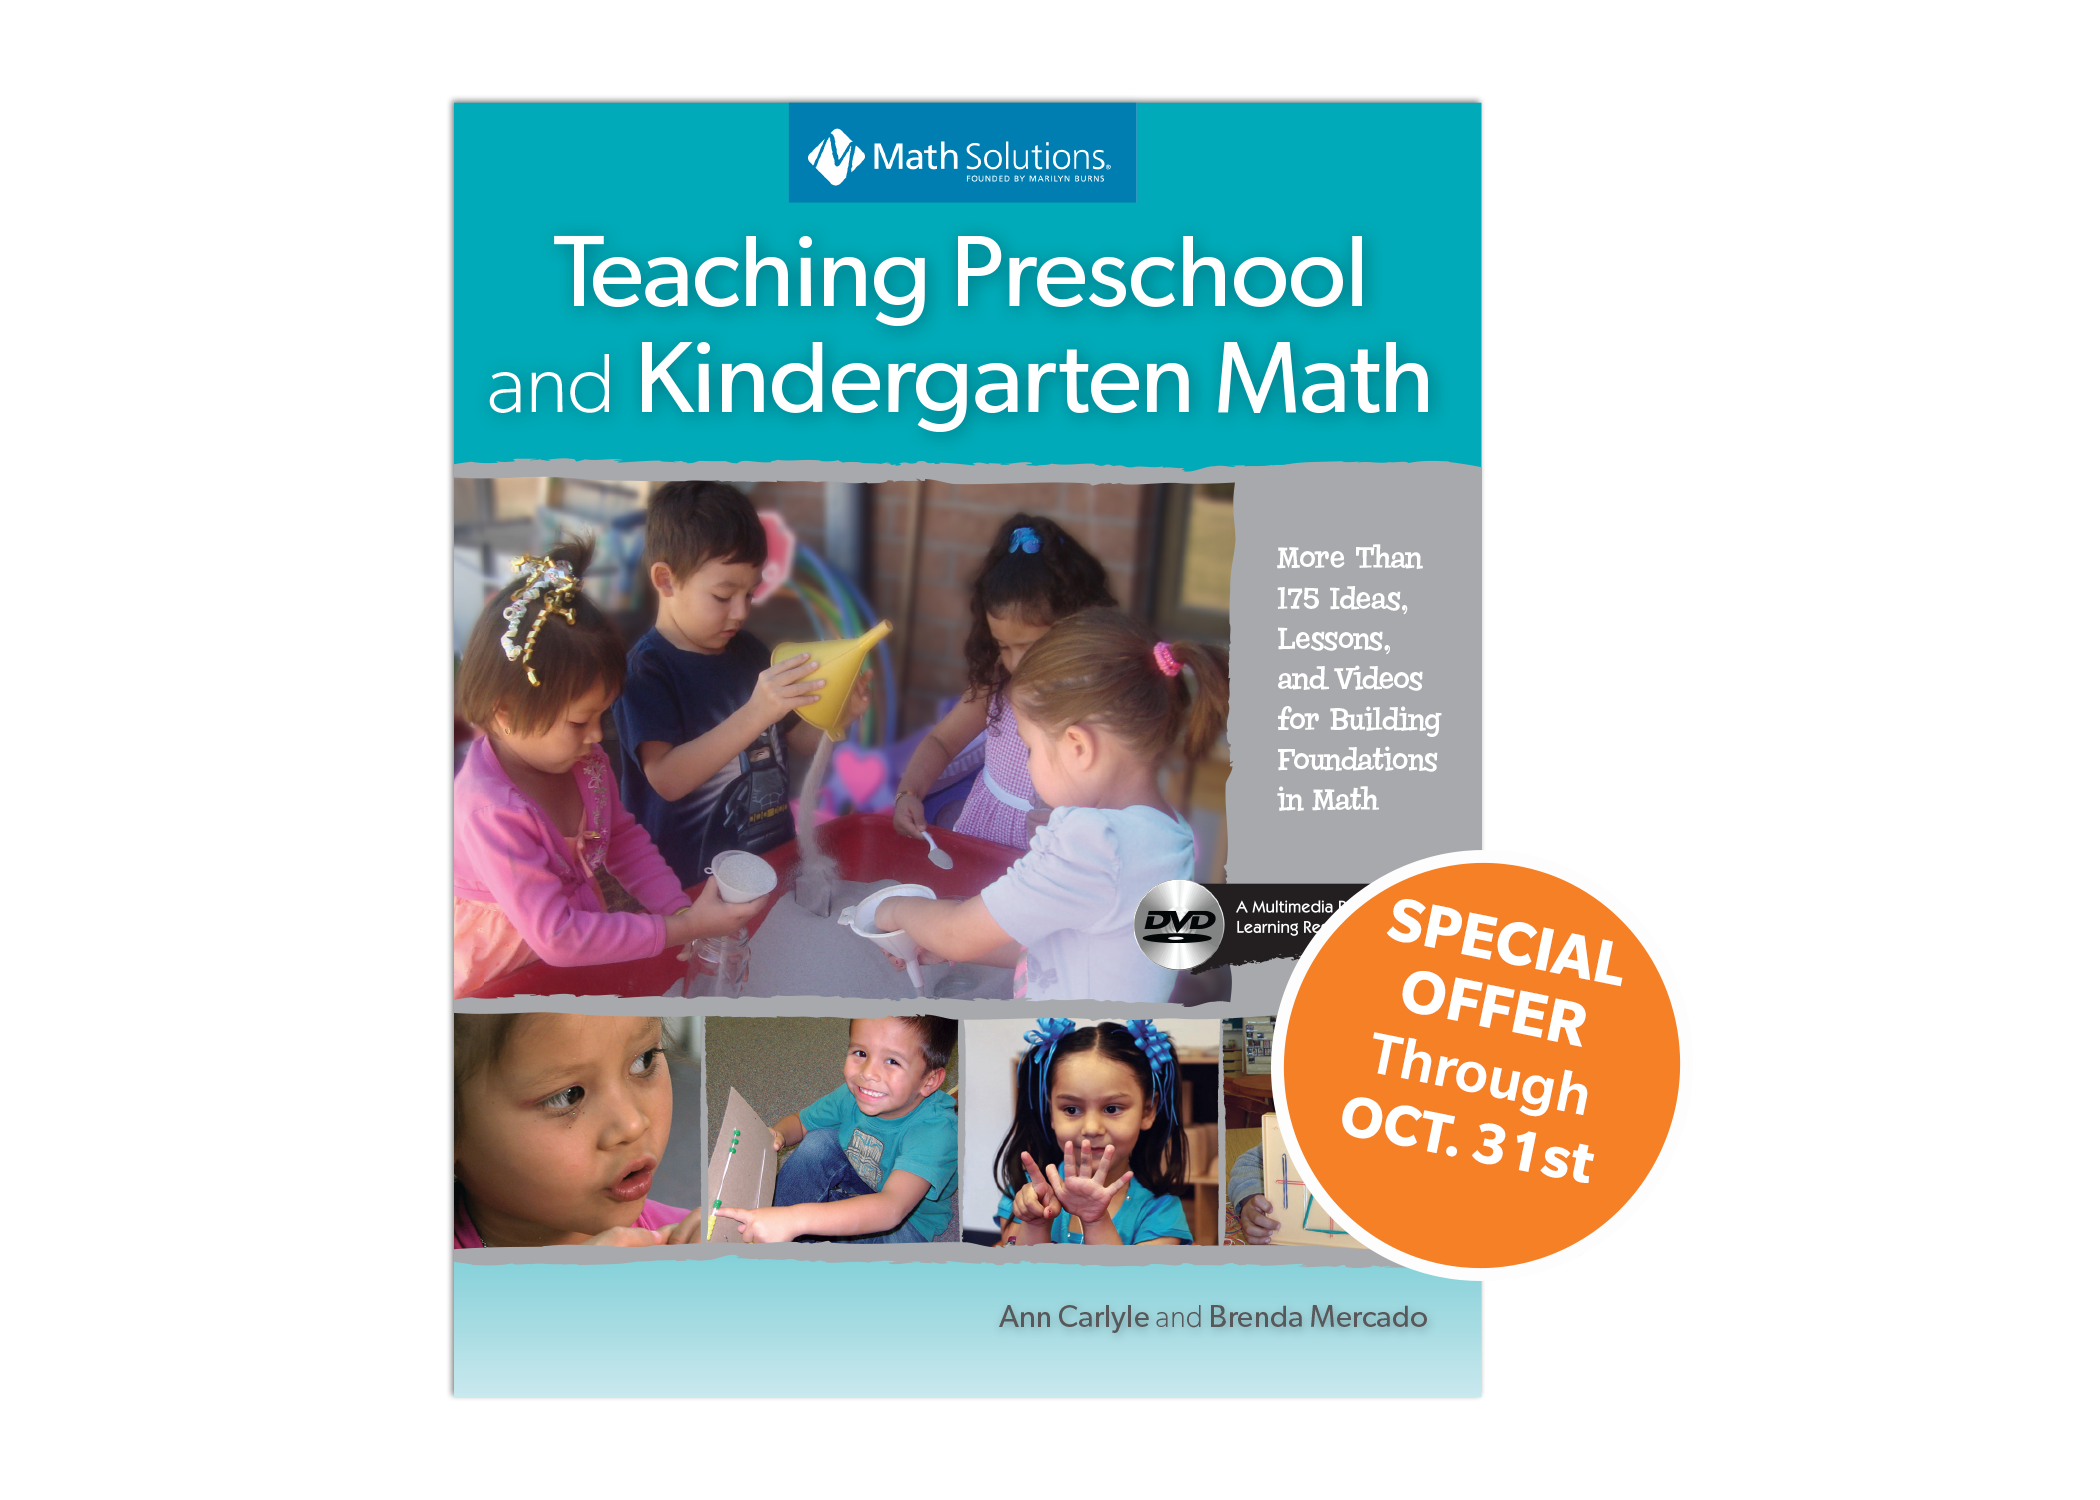 teaching preschool and kindergarten math book cover with special offer | special offer through oct 31st